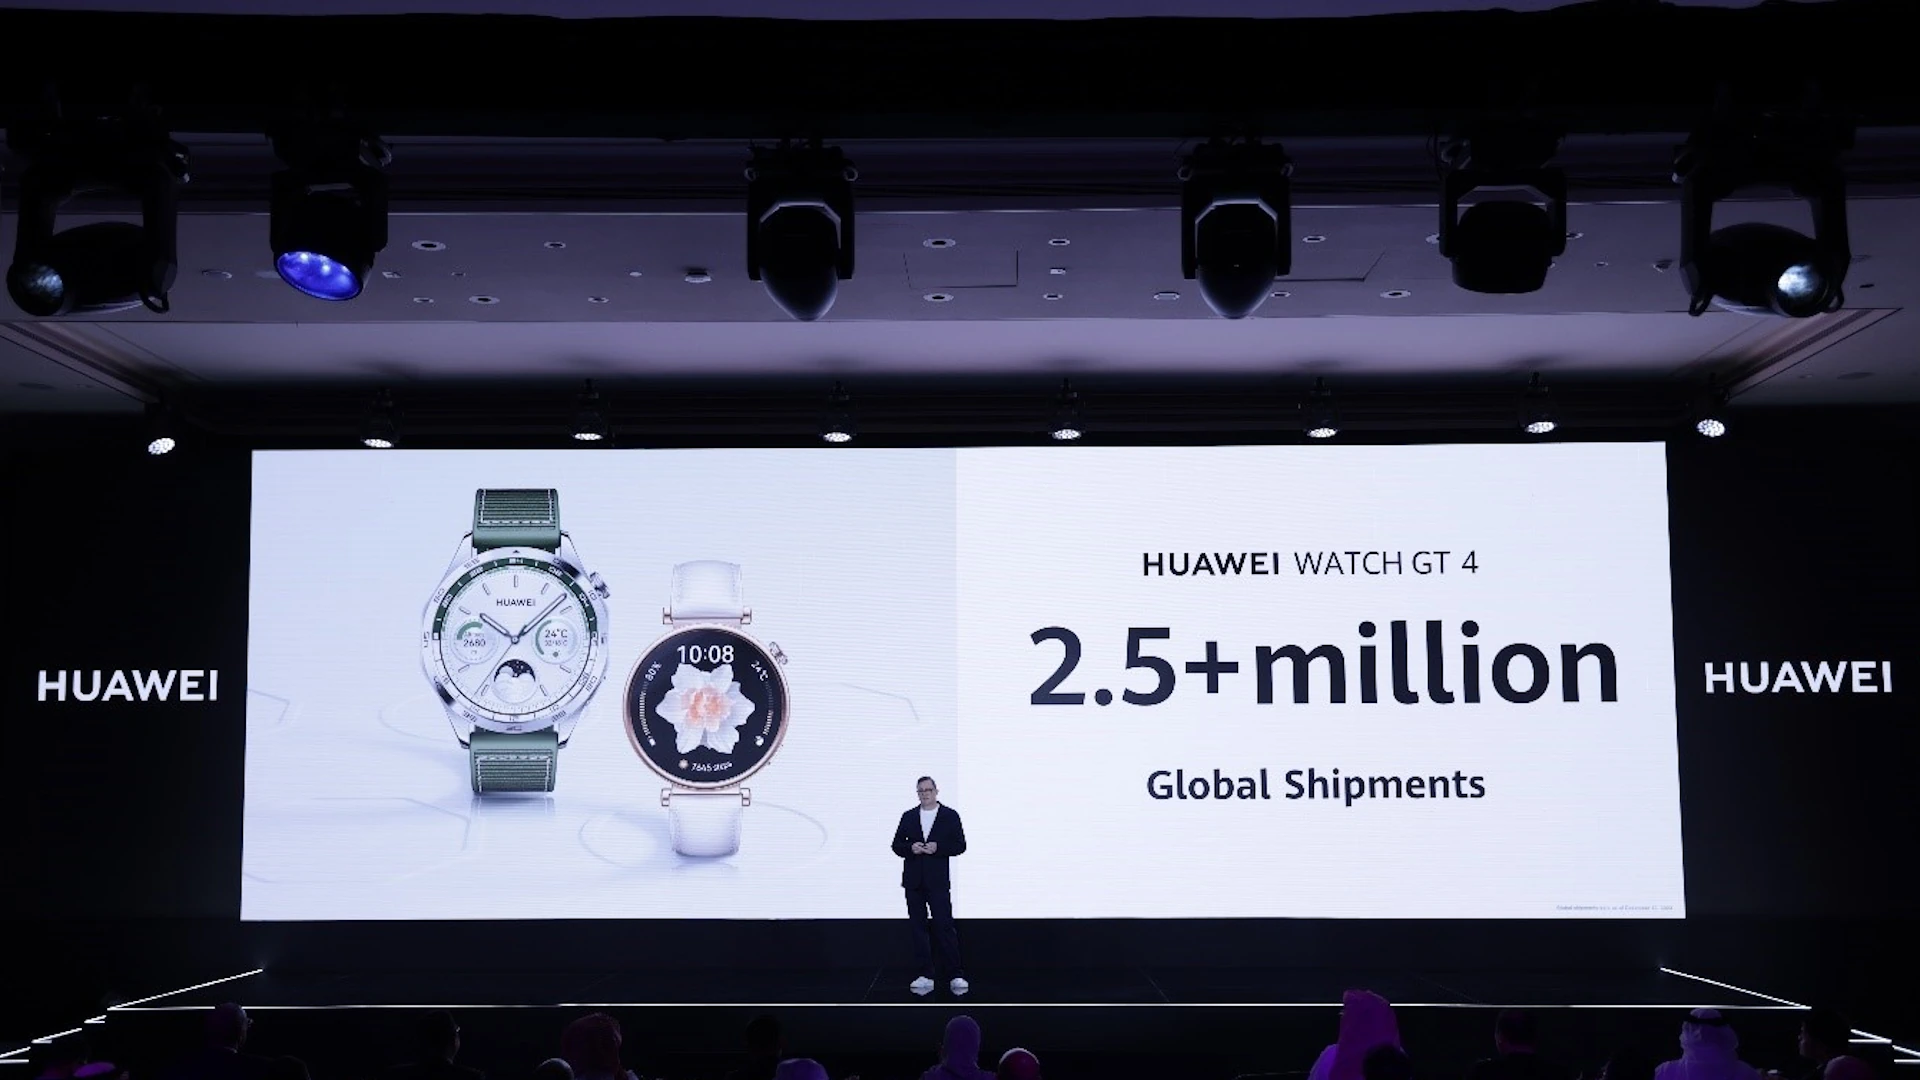 Huawei Watch GT 4 reached the anniversary of 2.5 million units shipped